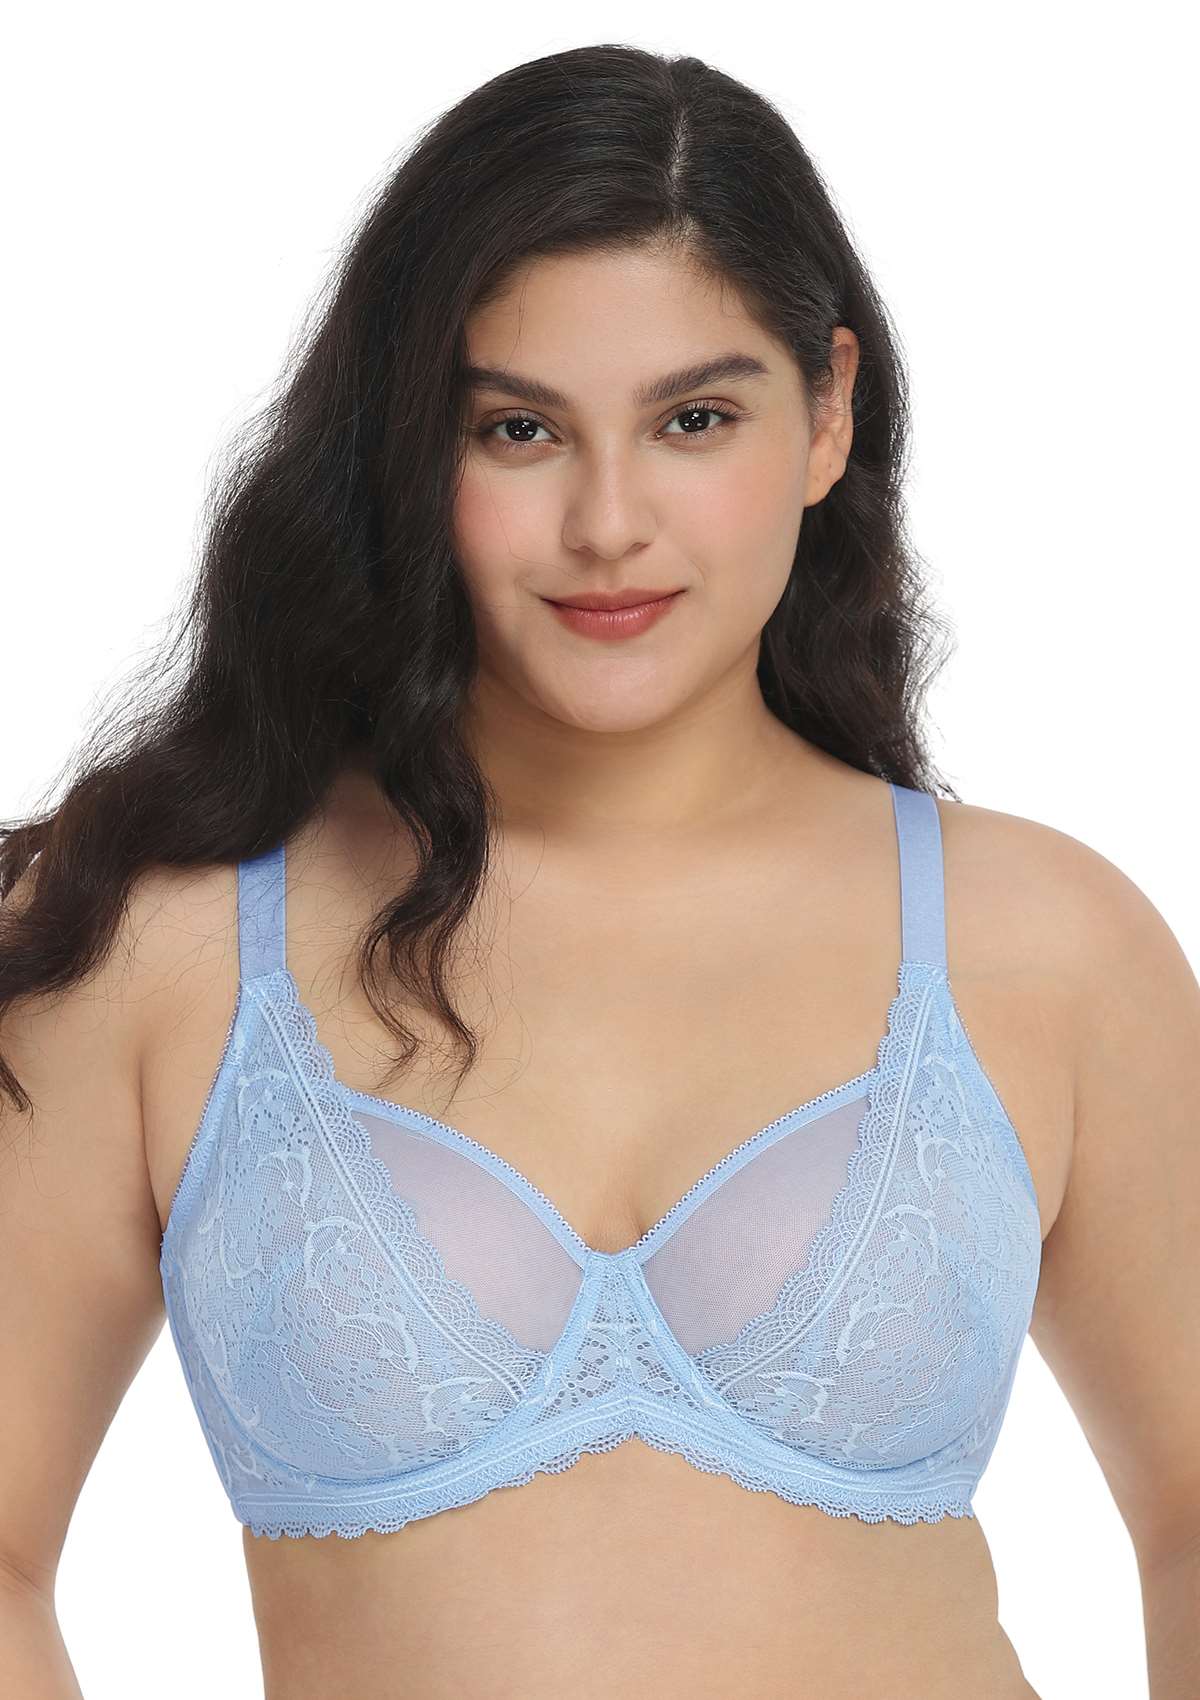 HSIA Anemone Big Bra: Best Bra For Lift And Support, Floral Bra - Light Blue / 34 / D